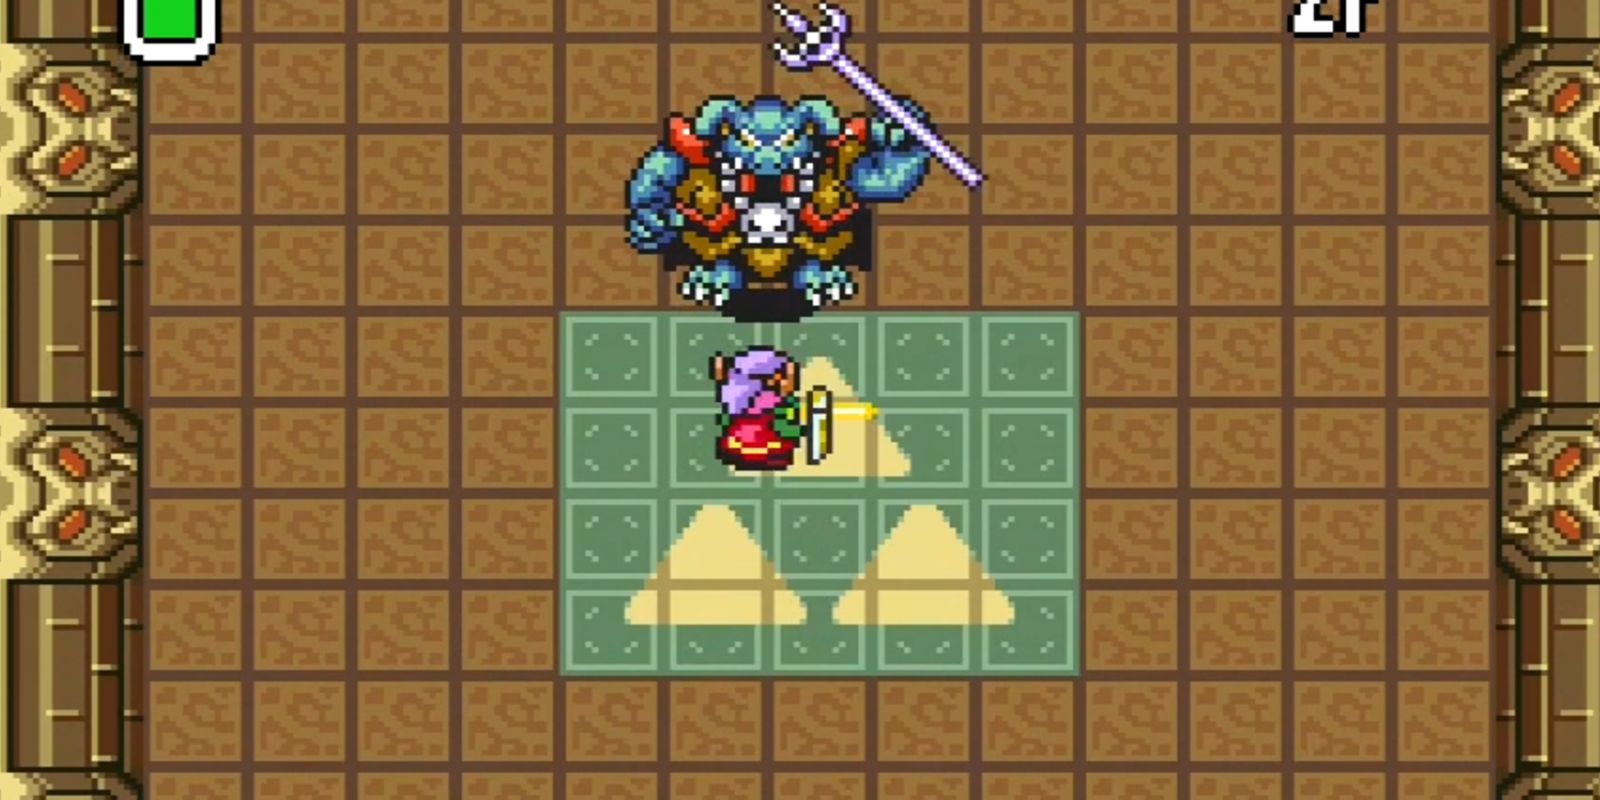 Link fighting Ganon in The Legend Of Zelda A Link To The Past